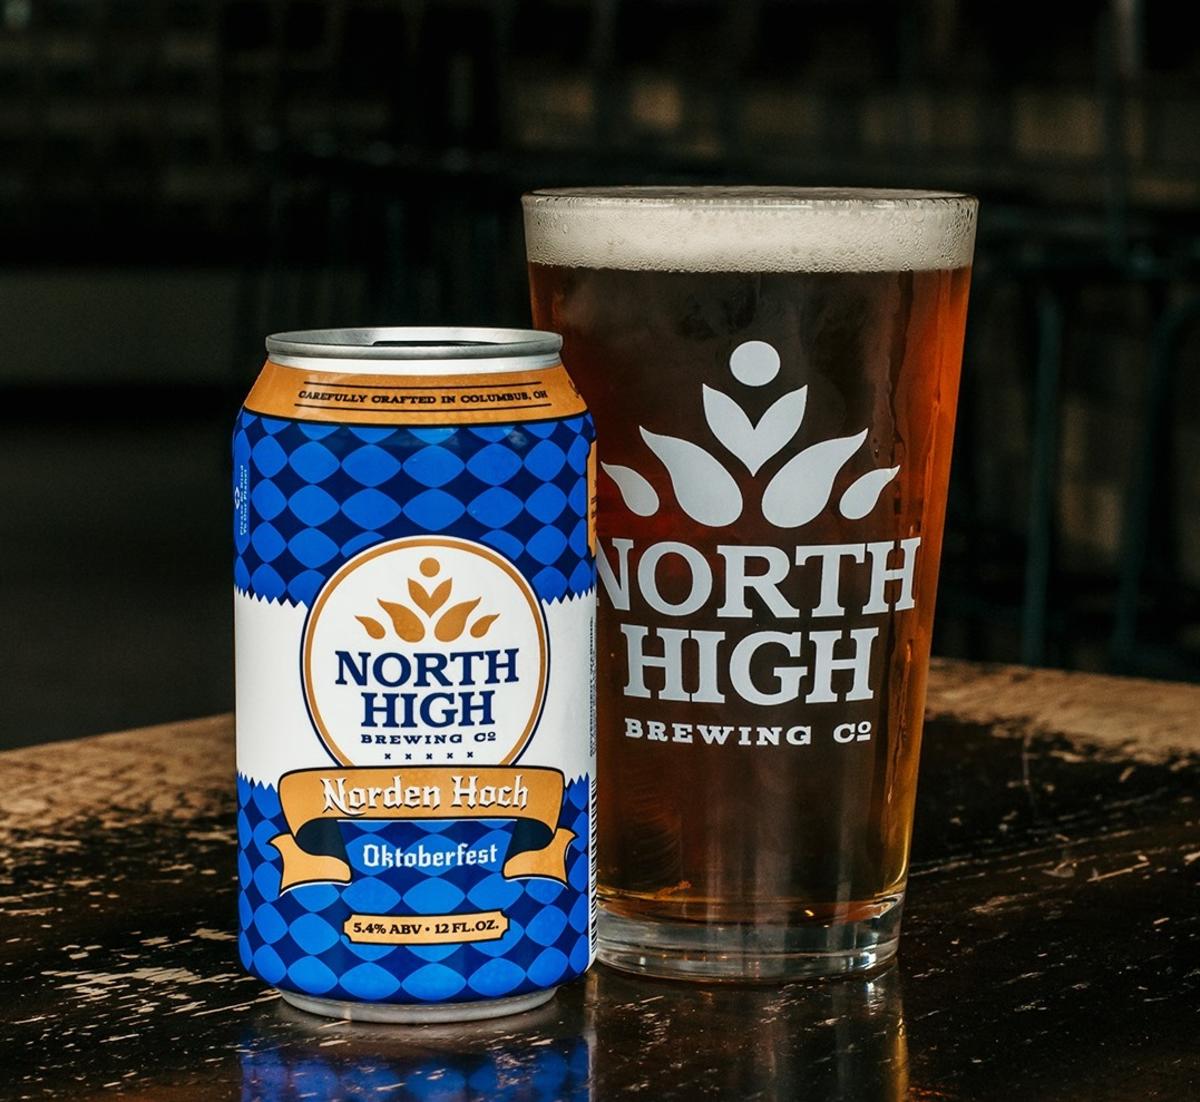 Can and pint glass of Oktoberfest beer from North High Brewing